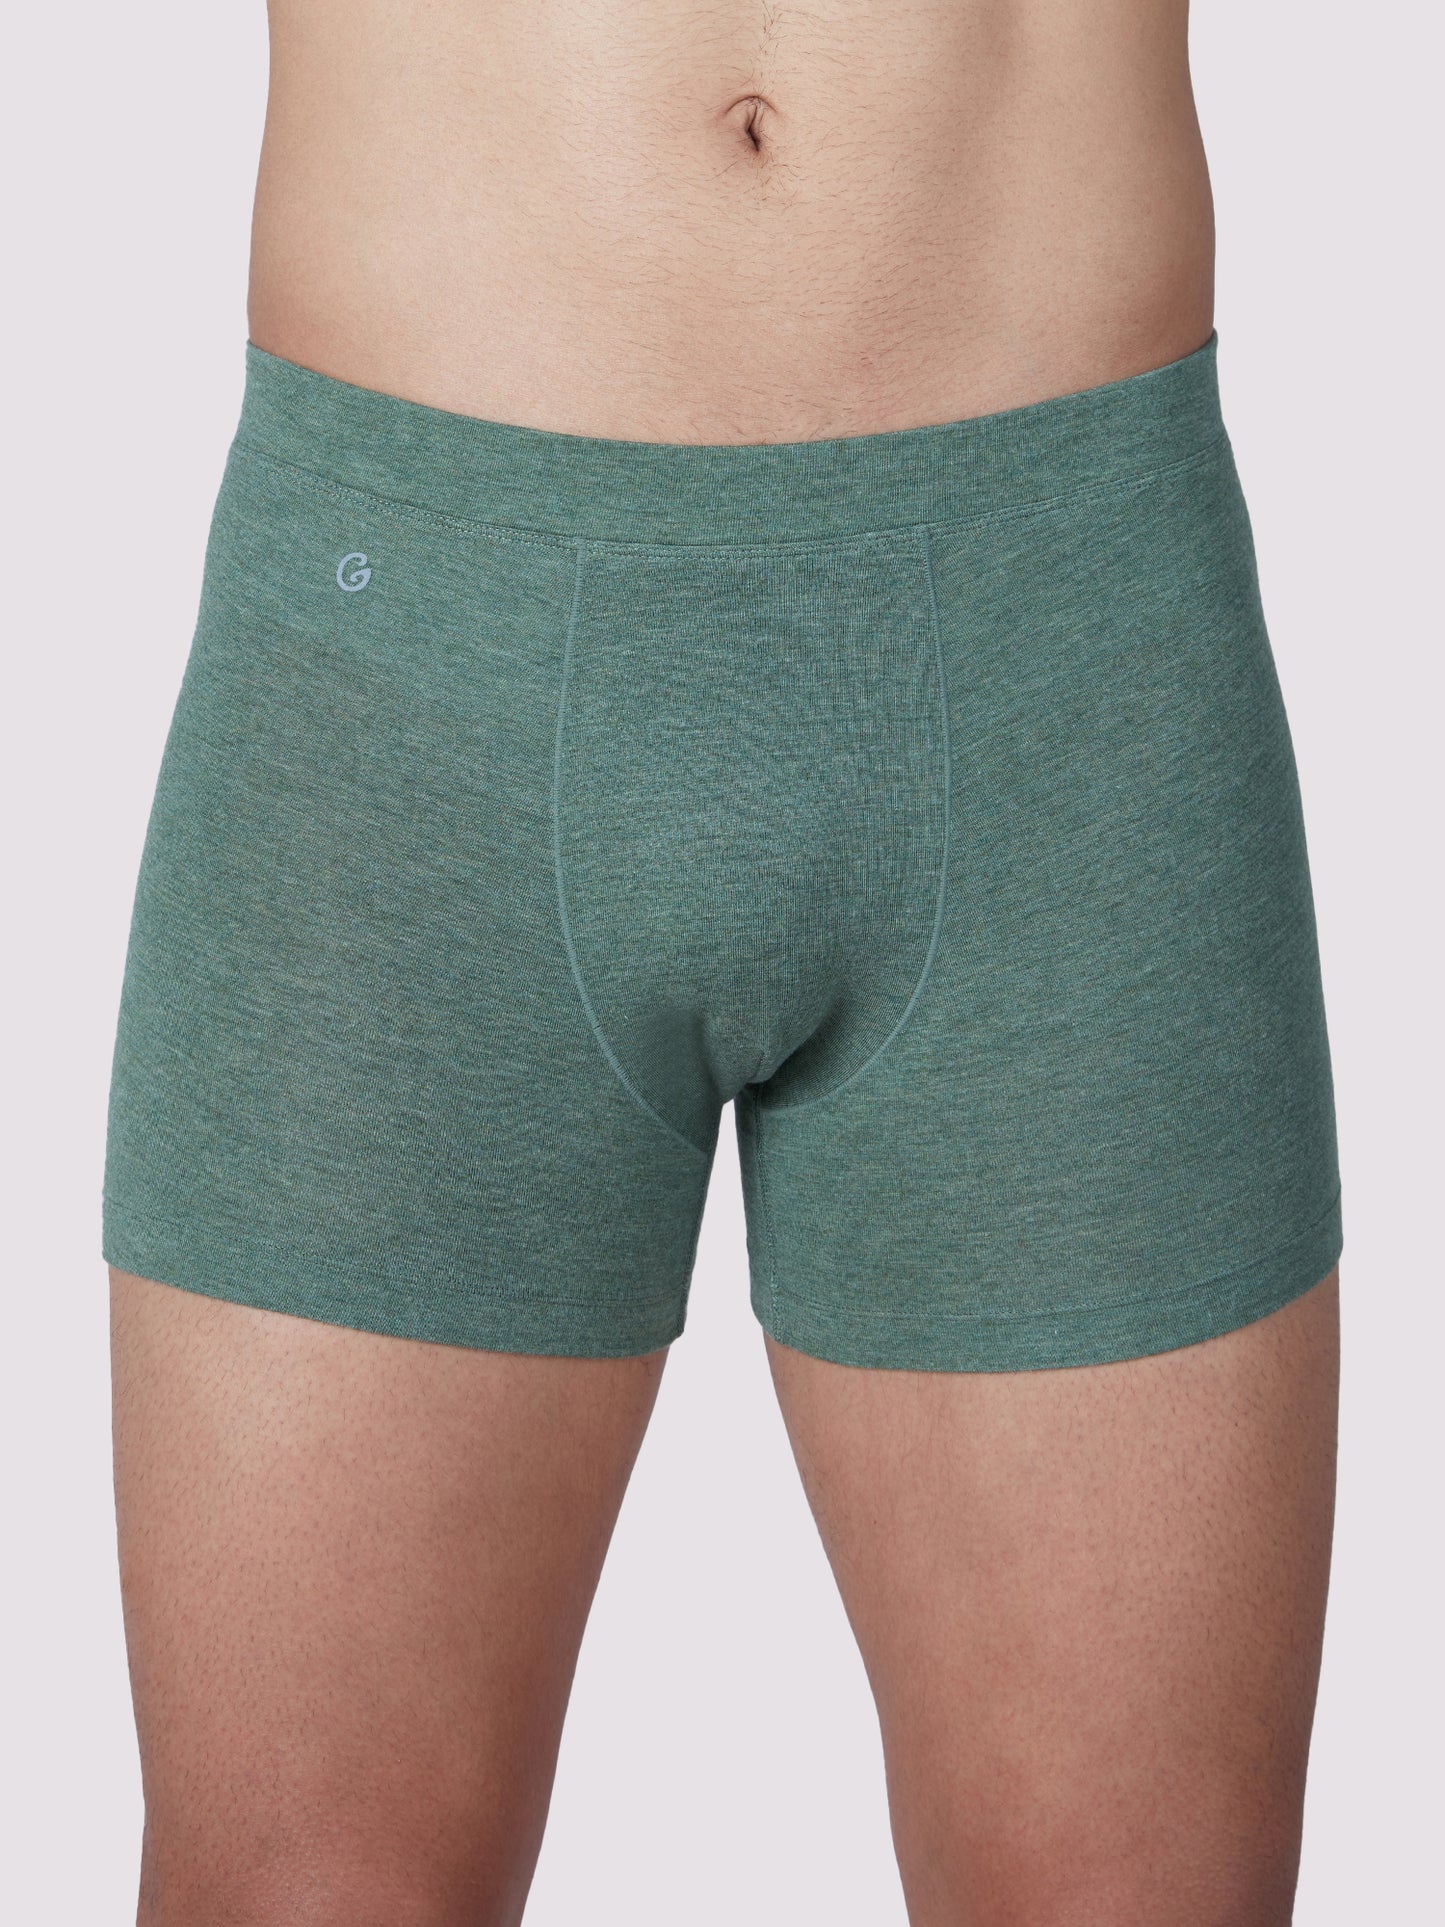 Buy BESIMPLE Men's Trunk Snug Fit Solid Underwear - Modal Spandex Fabric  Ultra - Light Comfortable Wear with Microfibre Waistband Online at Best  Prices in India - JioMart.